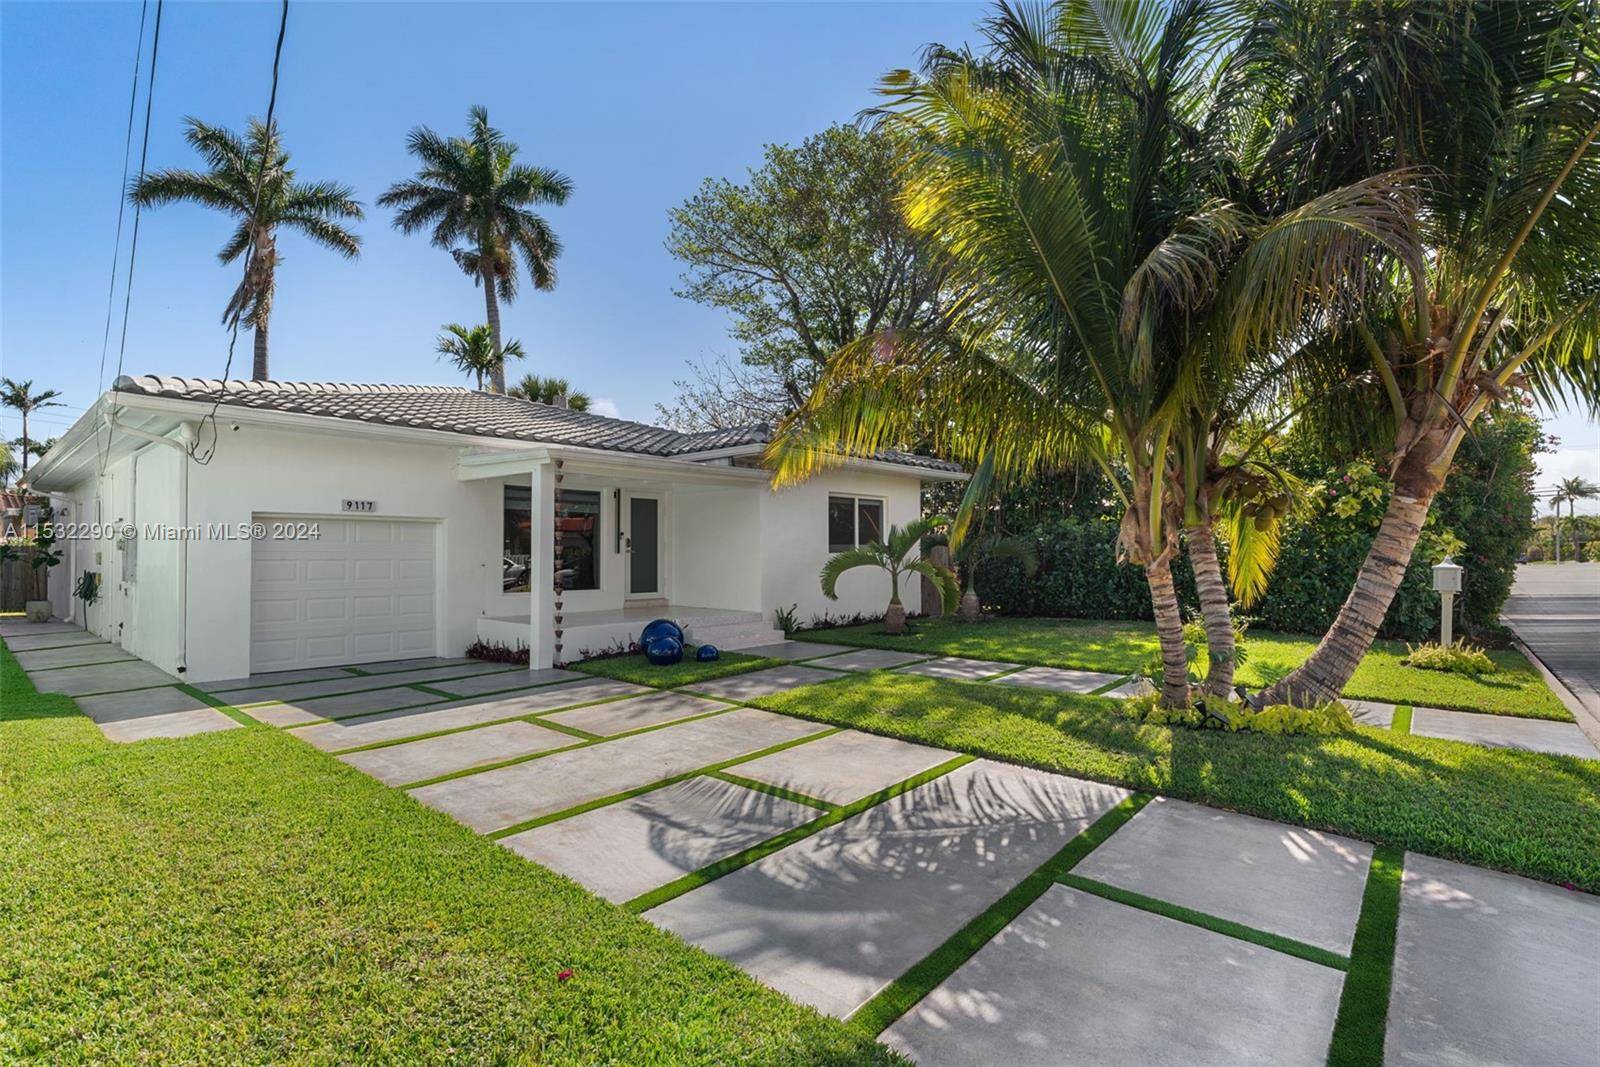 Escape to the tranquil allure of the highly sought after area of Surfside, in this completely remodeled home.